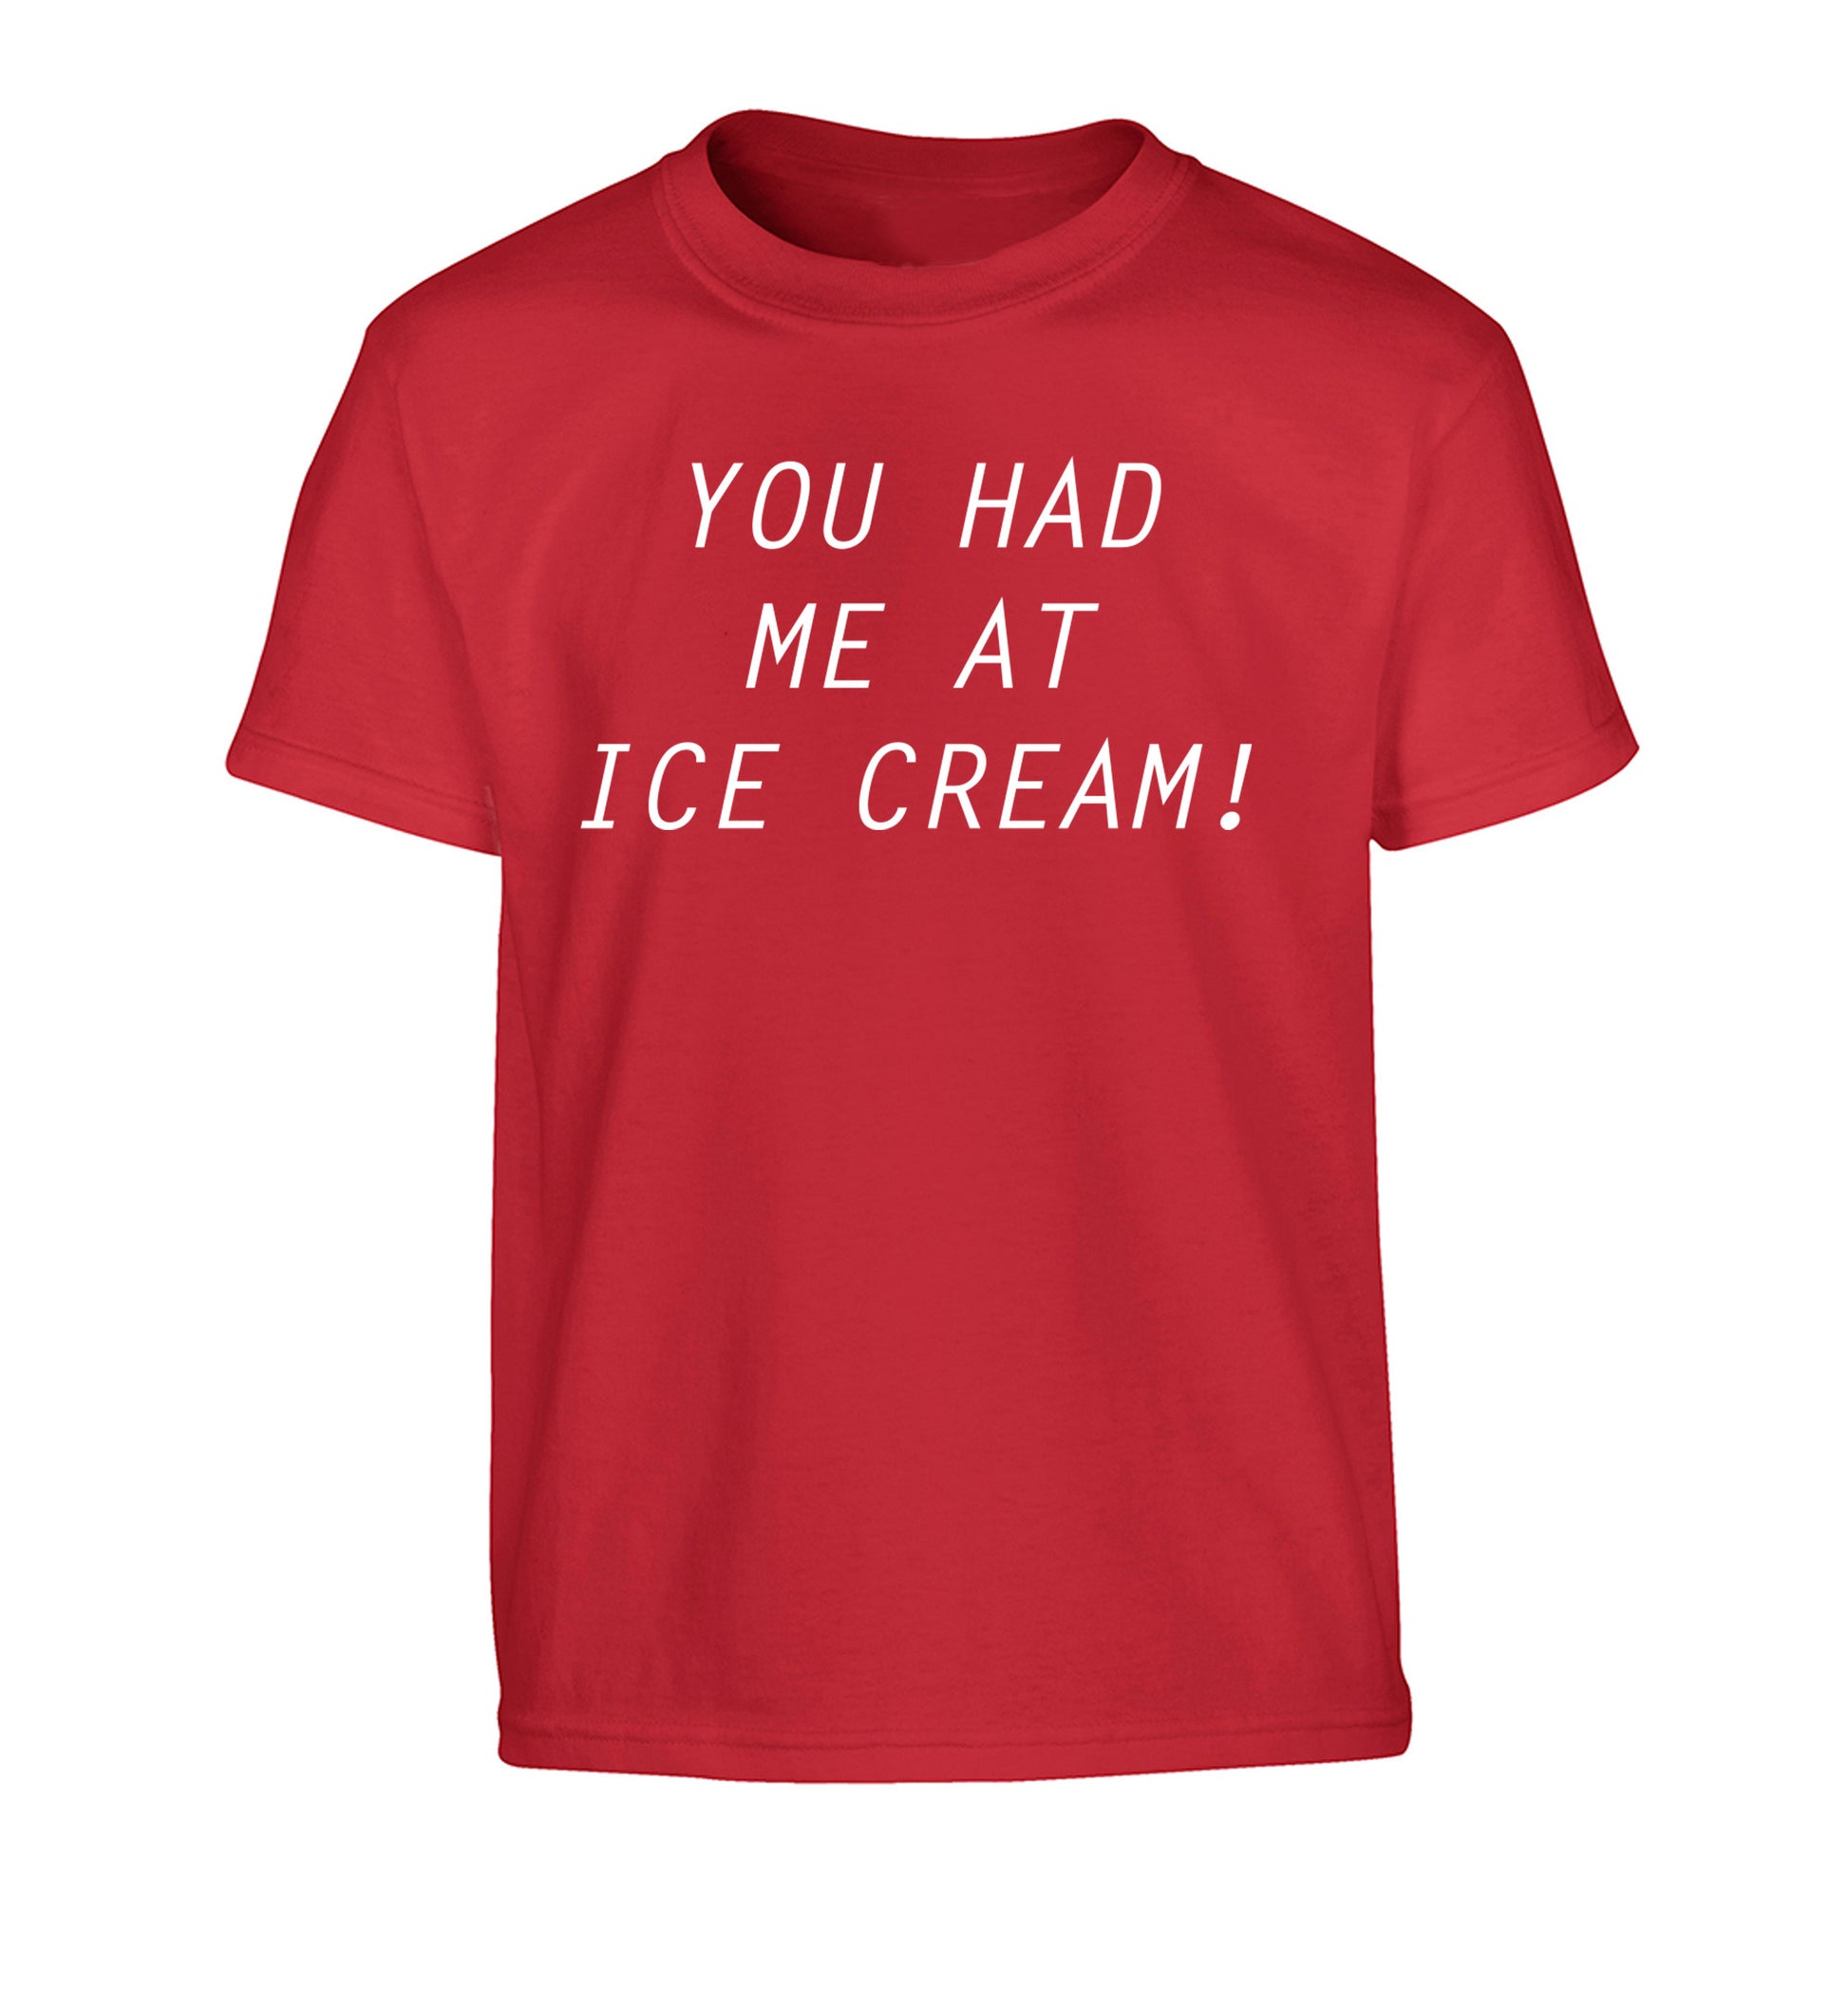 You had me at ice cream Children's red Tshirt 12-14 Years